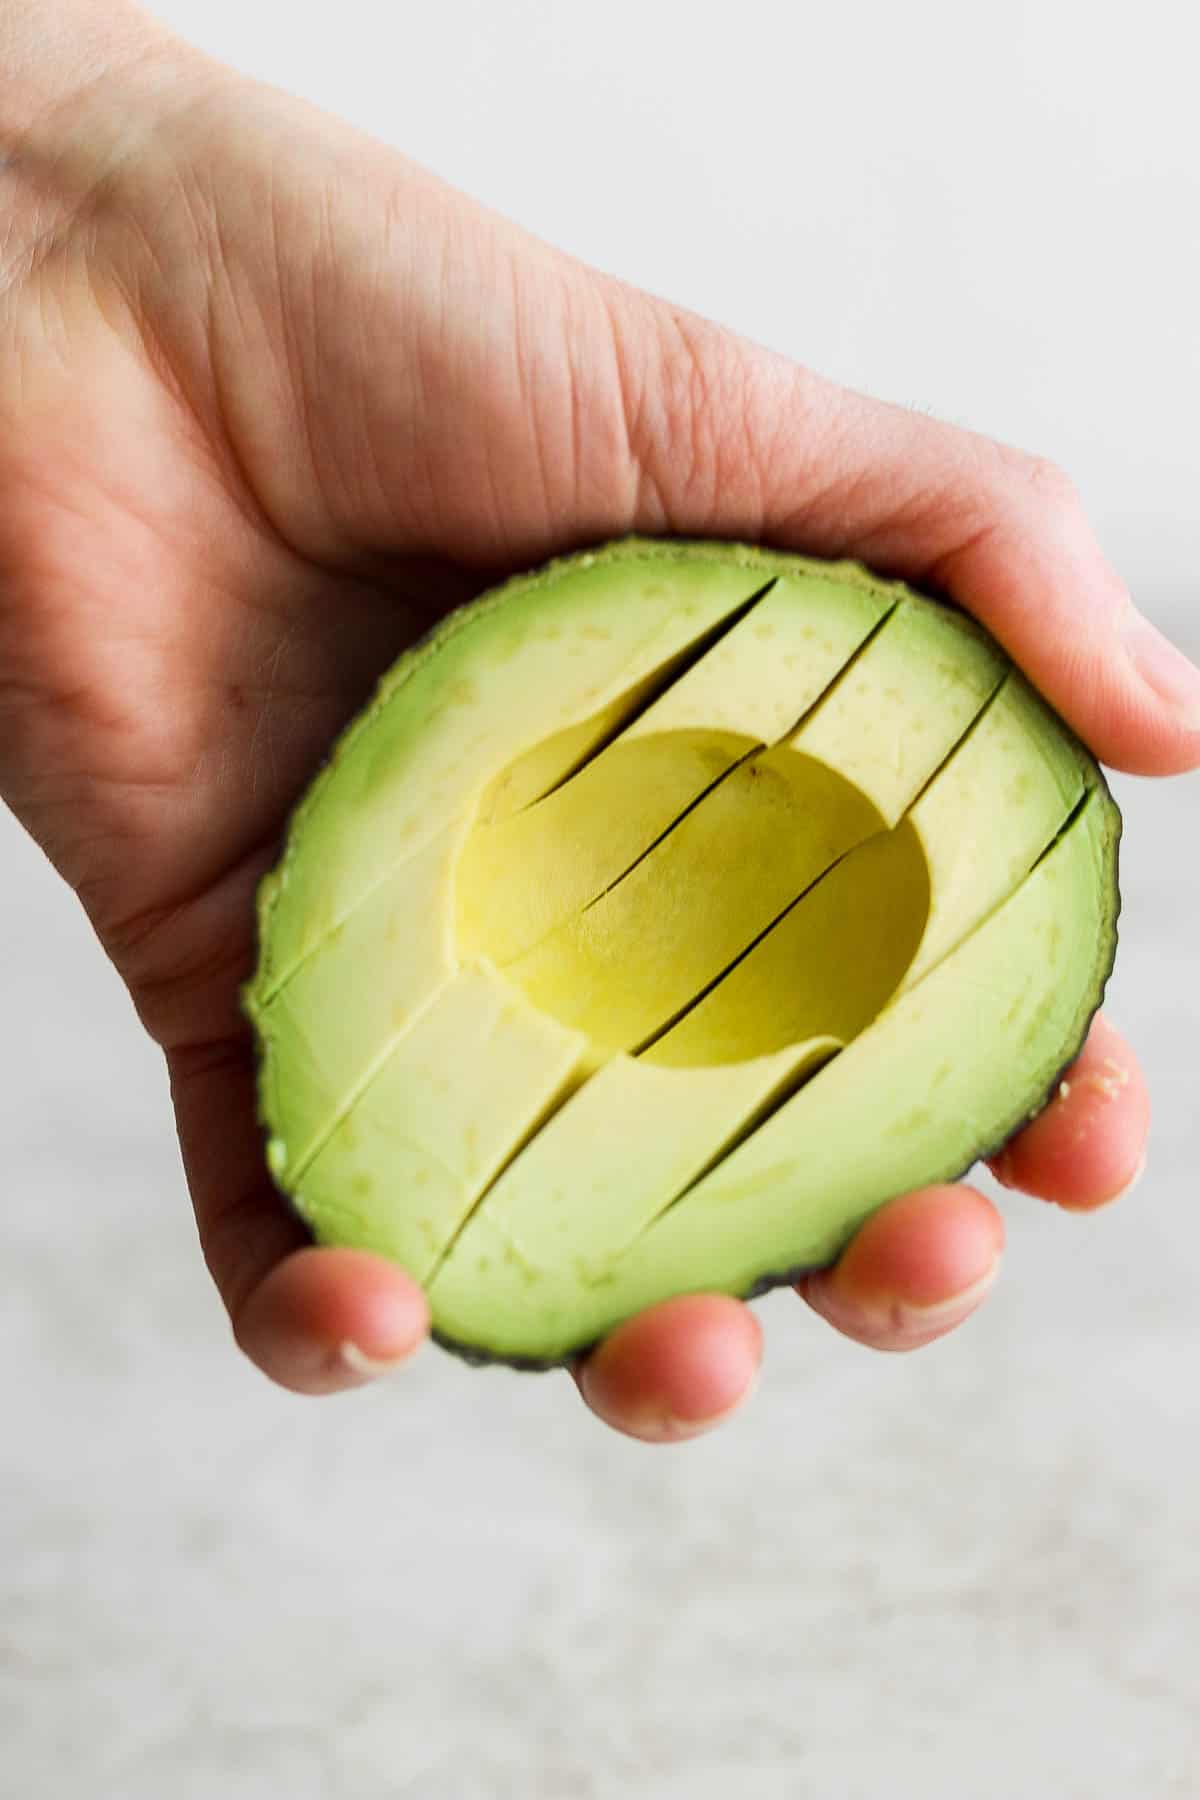 A hand holding half of an avocado that has been sliced.